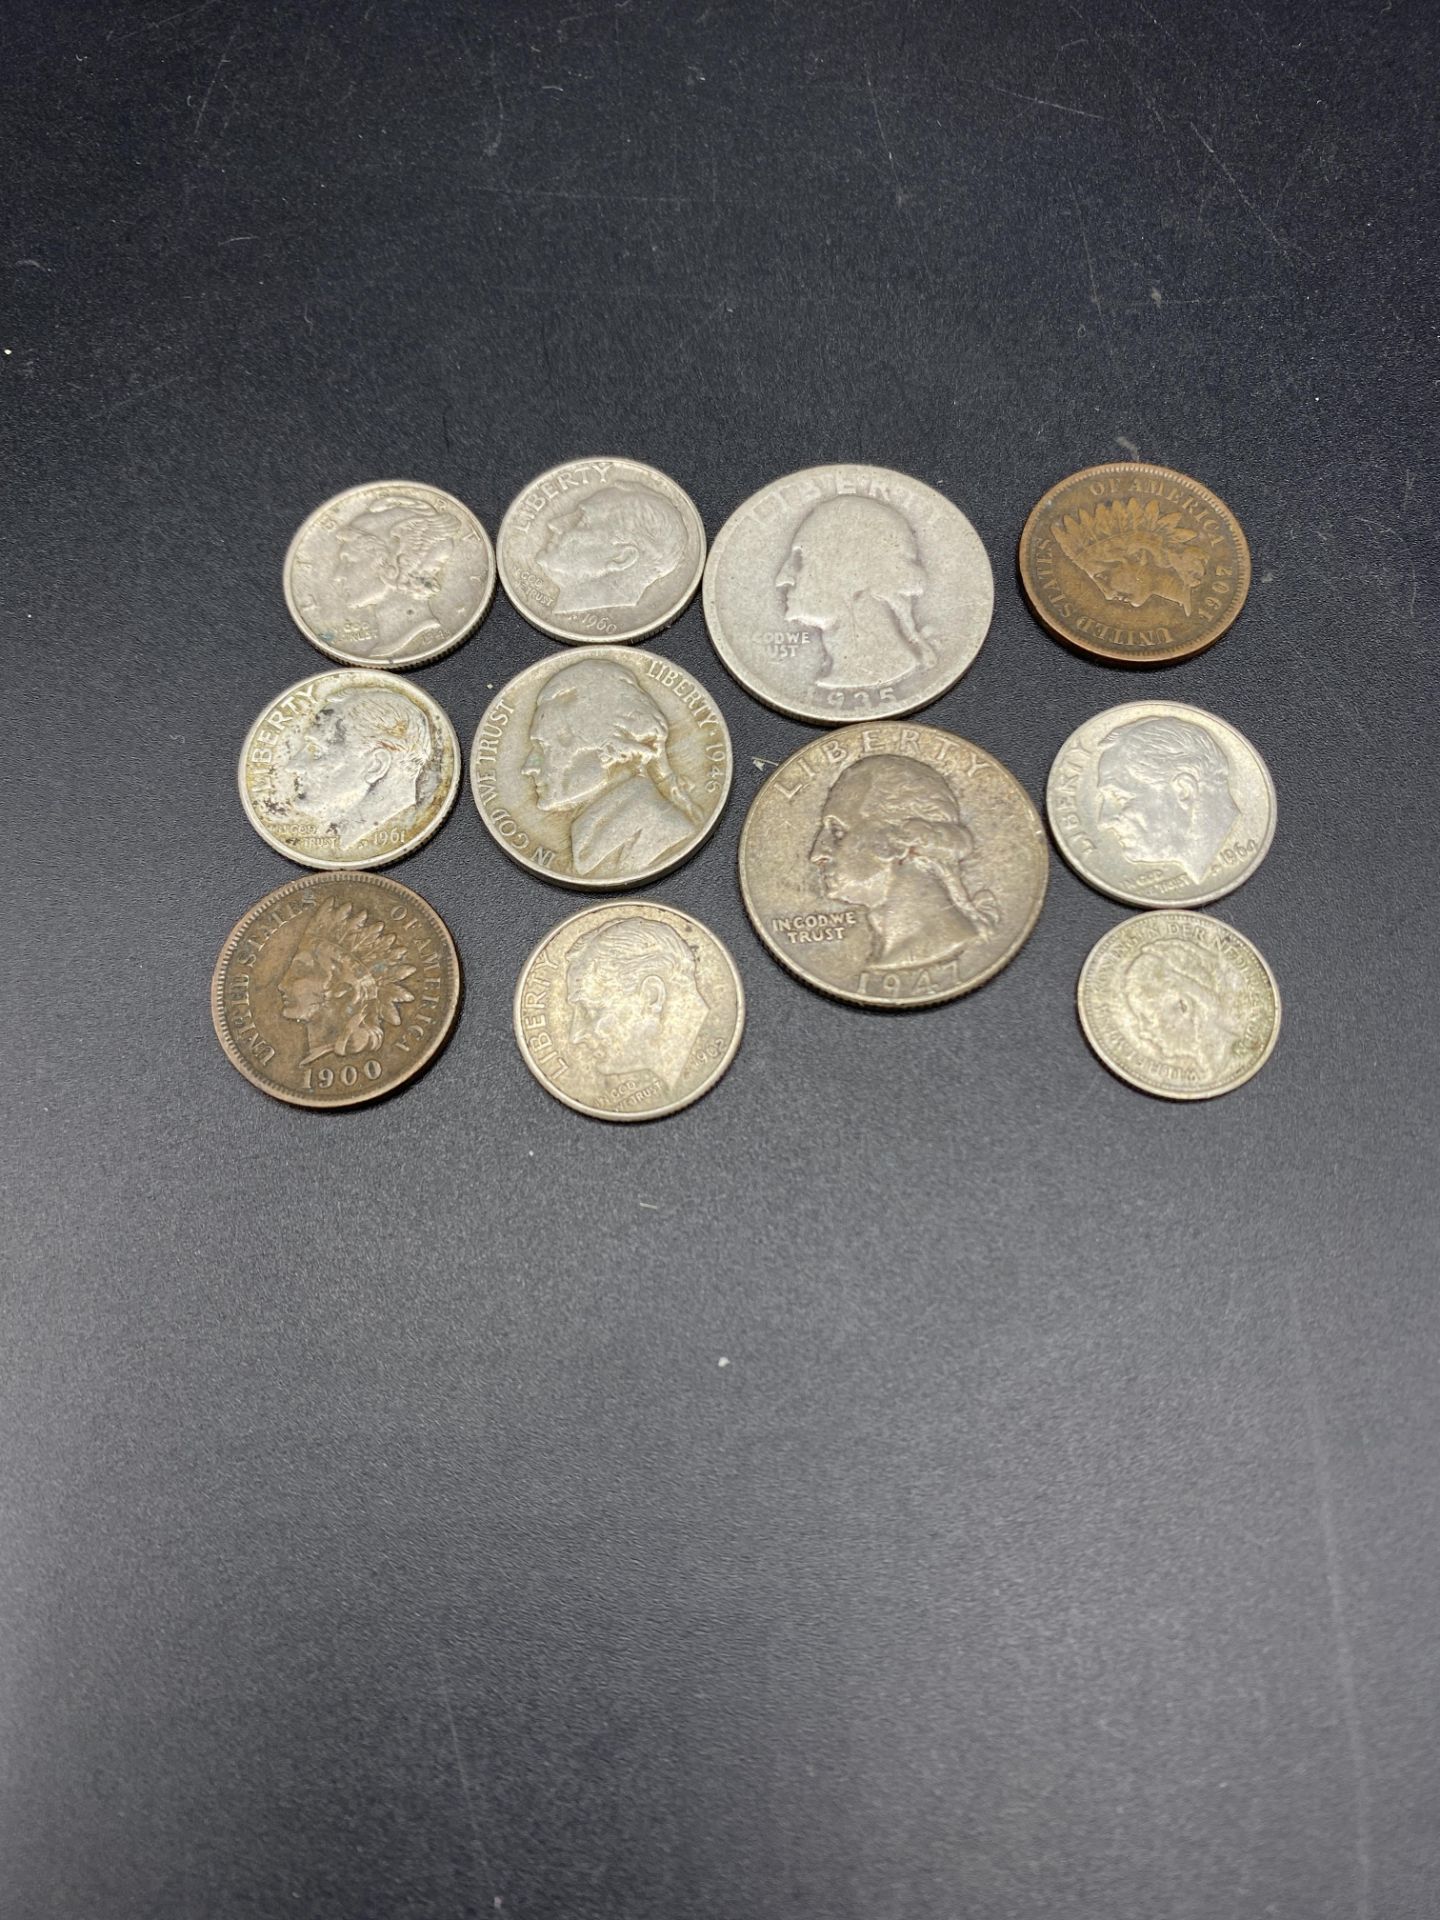 Quantity of USA coins with a Dutch coin